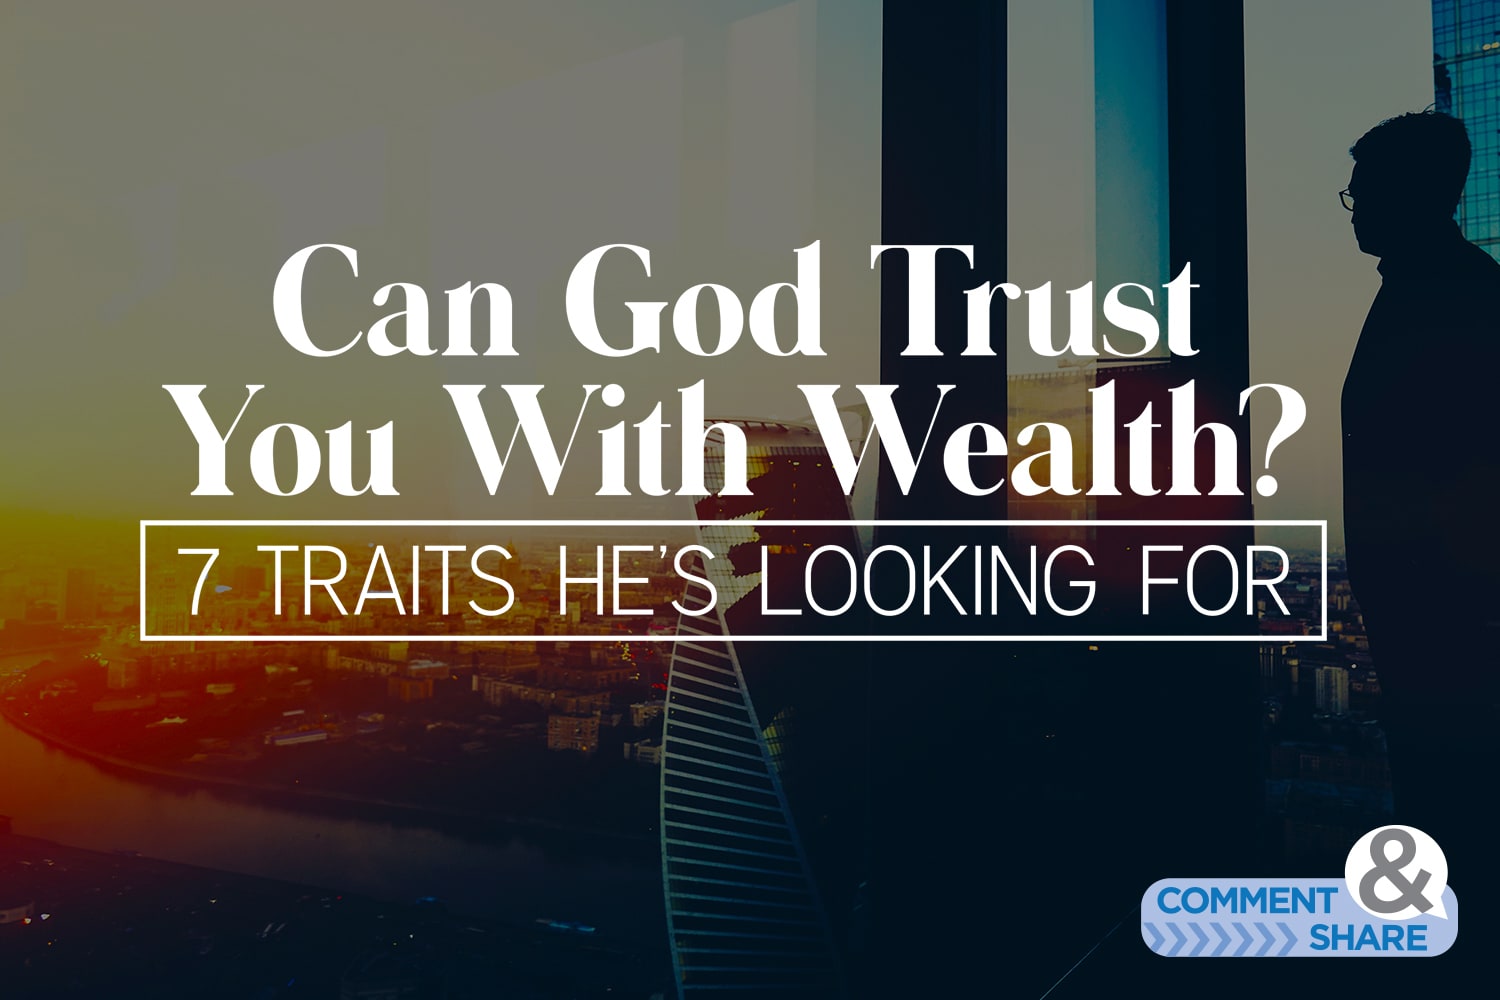 Can God Trust You With Wealth?